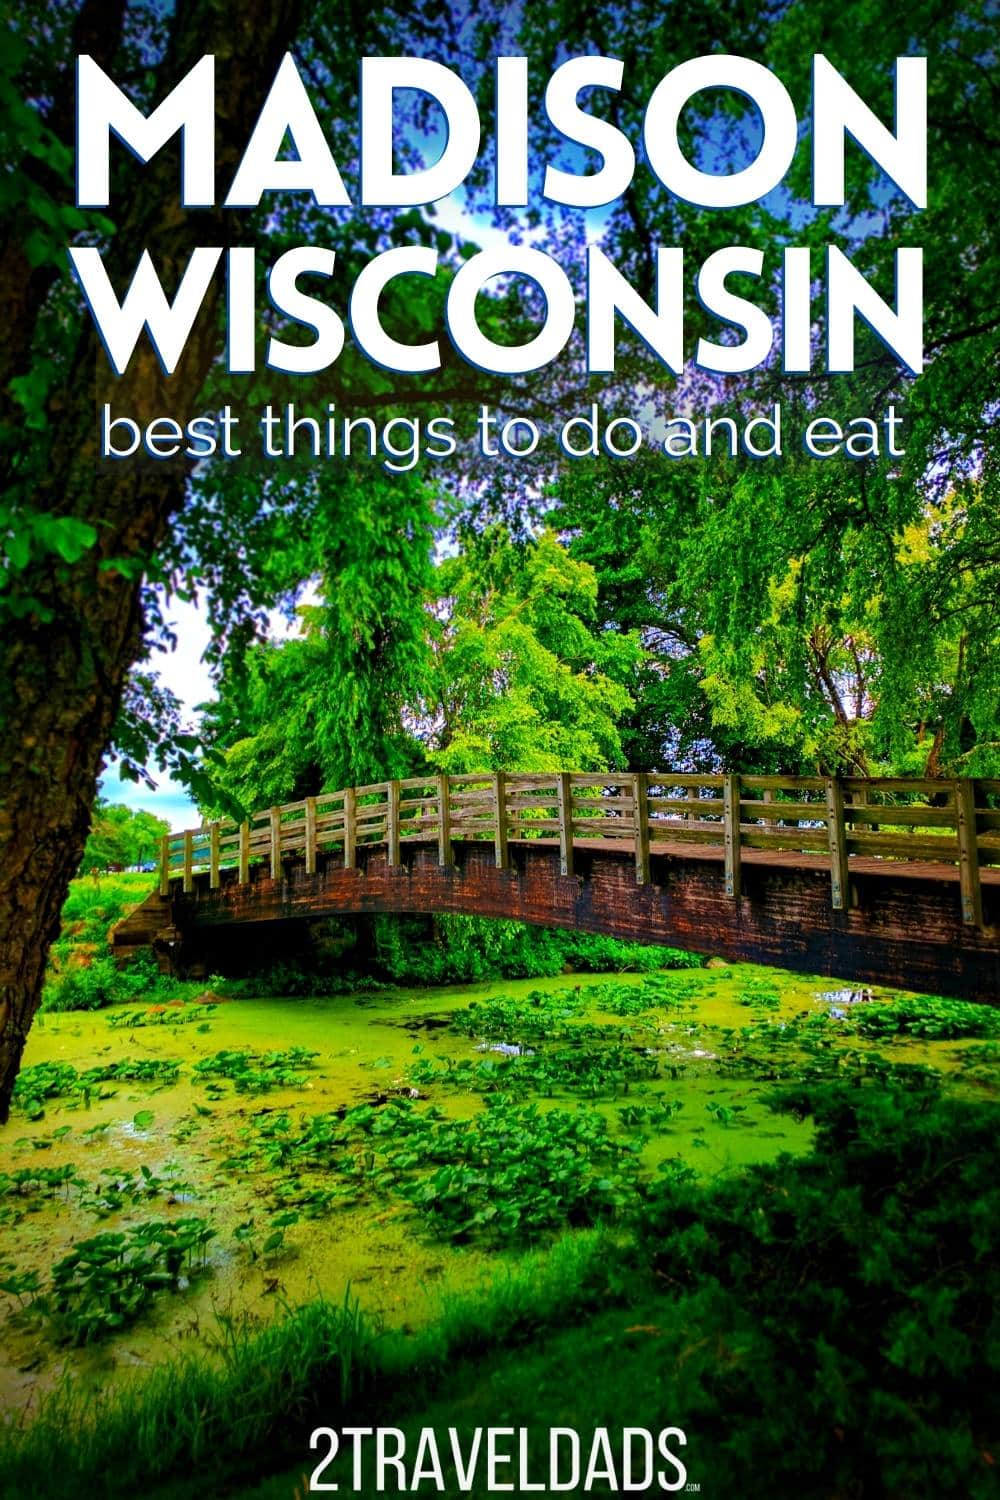 The best things to do in Madison, Wisconsin in summer, including downtown, museums and nature. Recommendations for where to eat, best beers and fun things to do with kids in Madison.